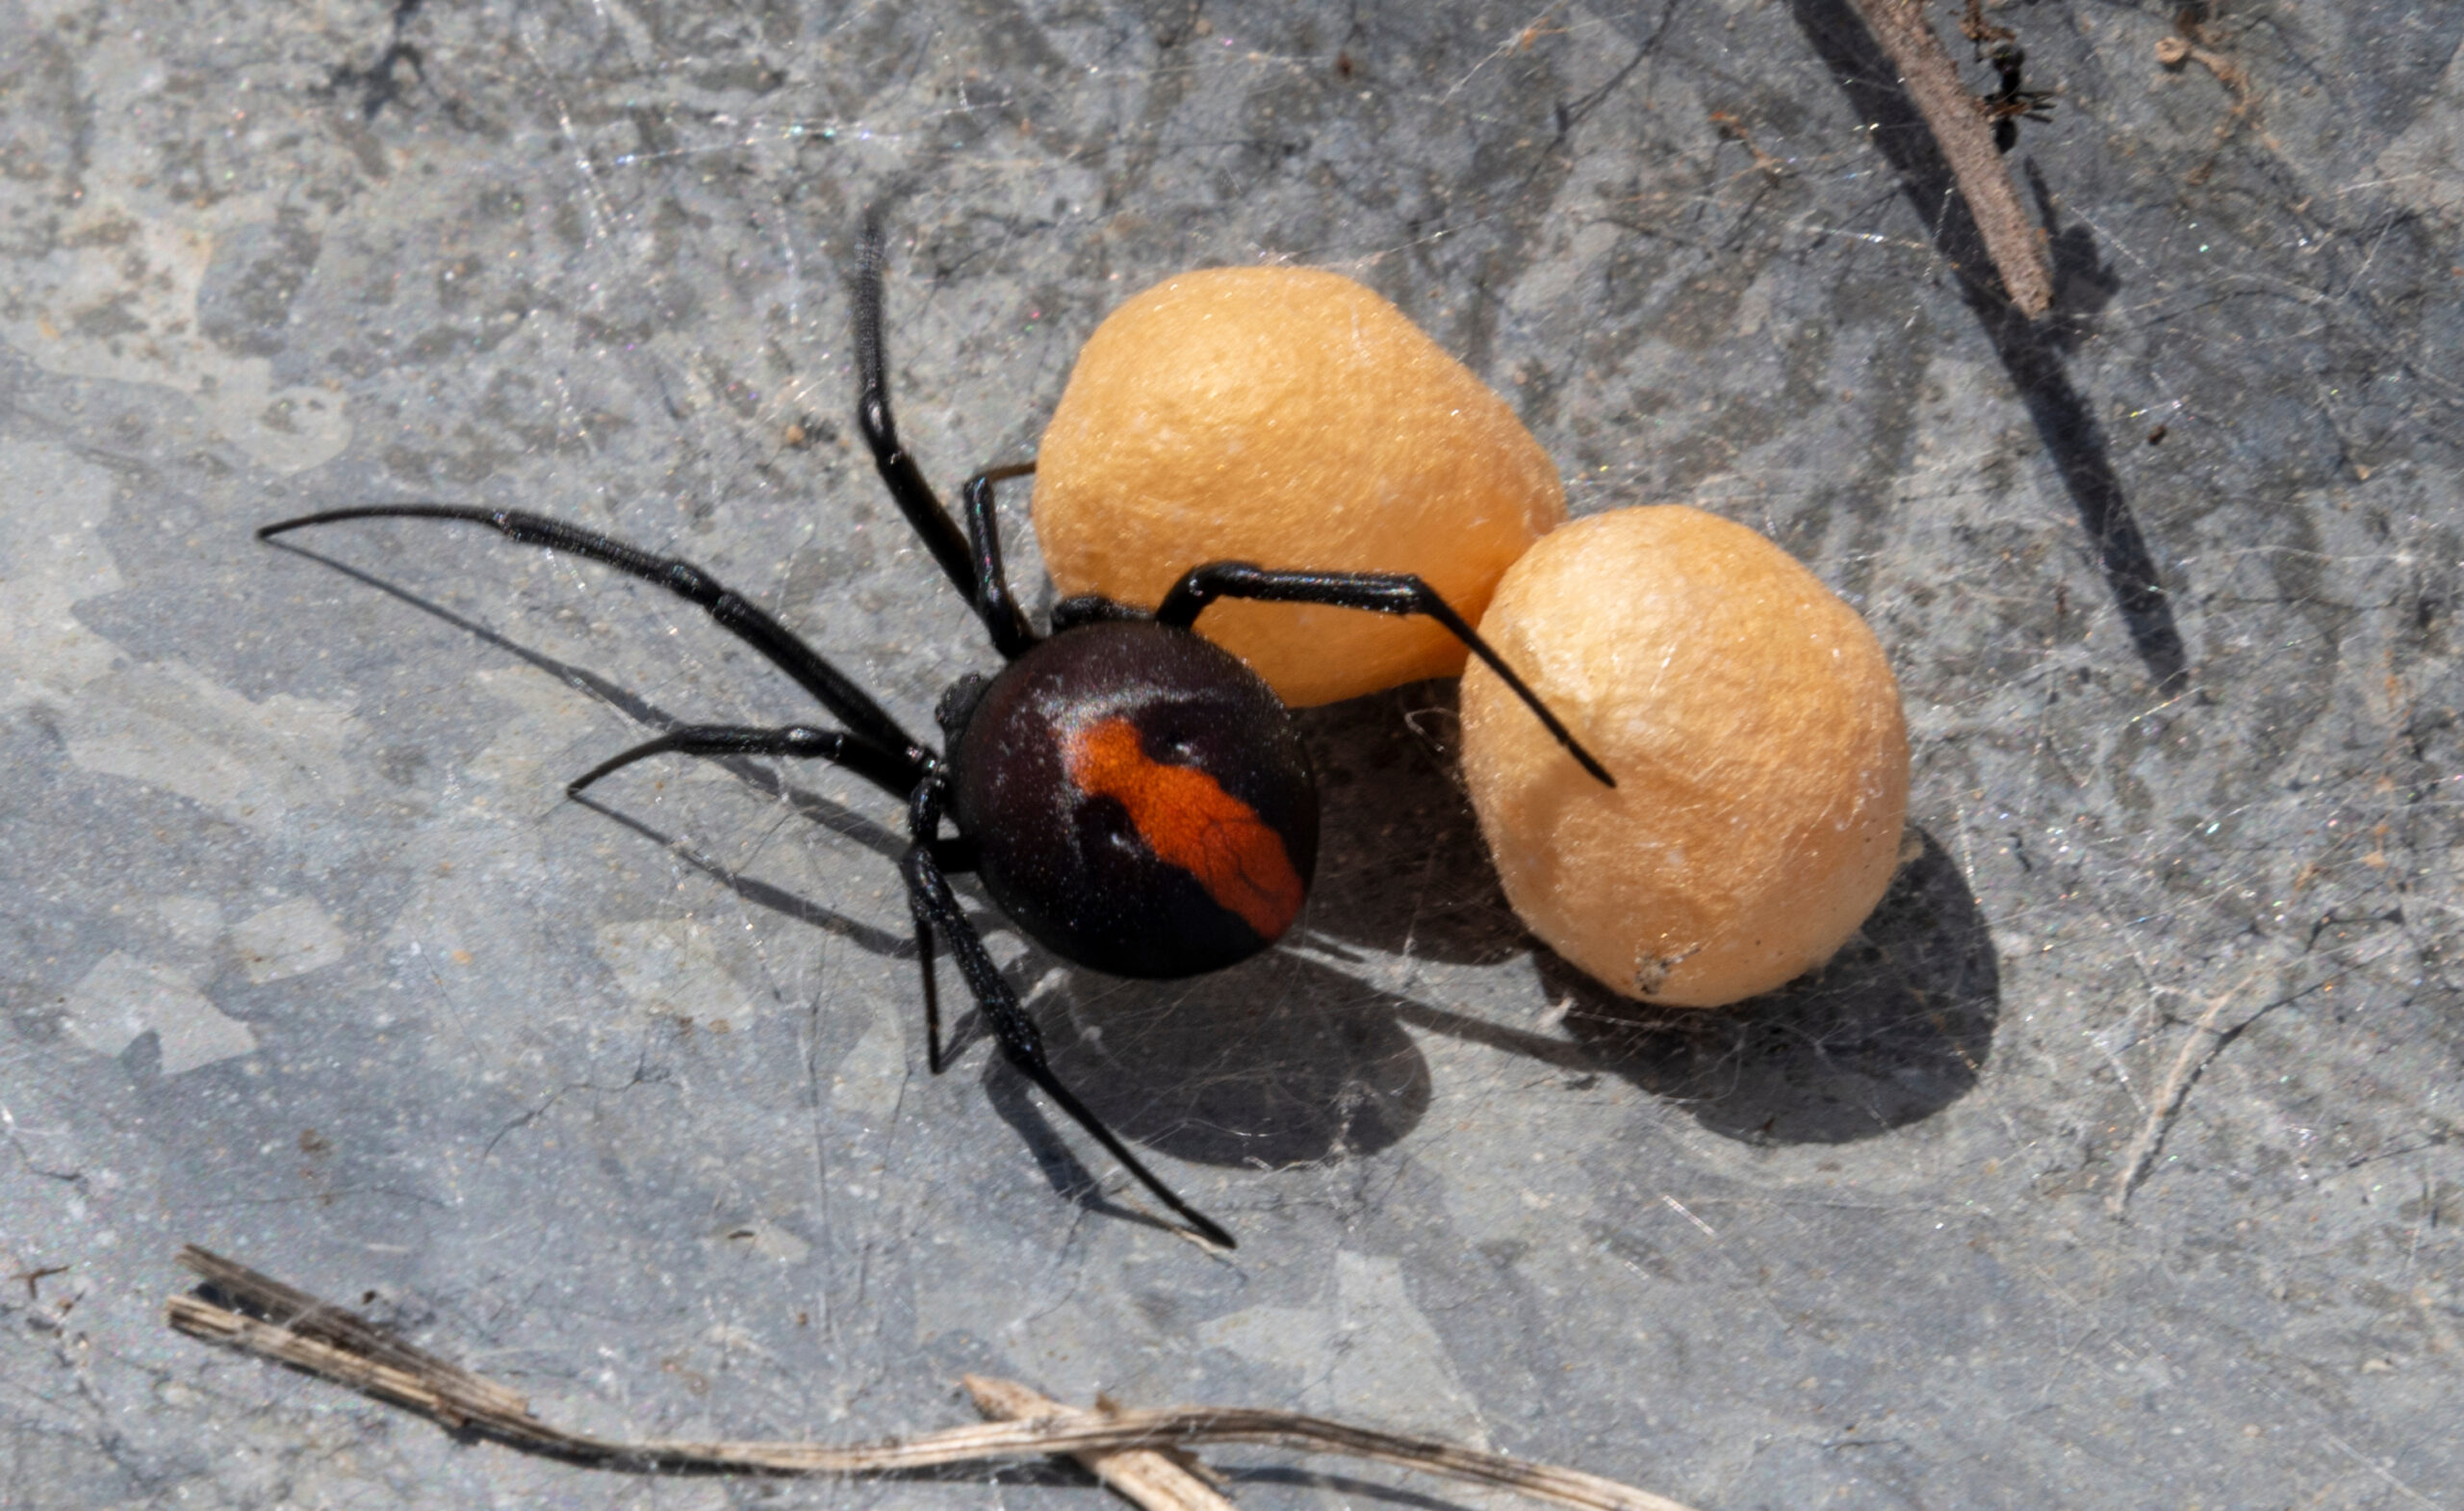 Close-up of a dangerous black widow spider with its eggs